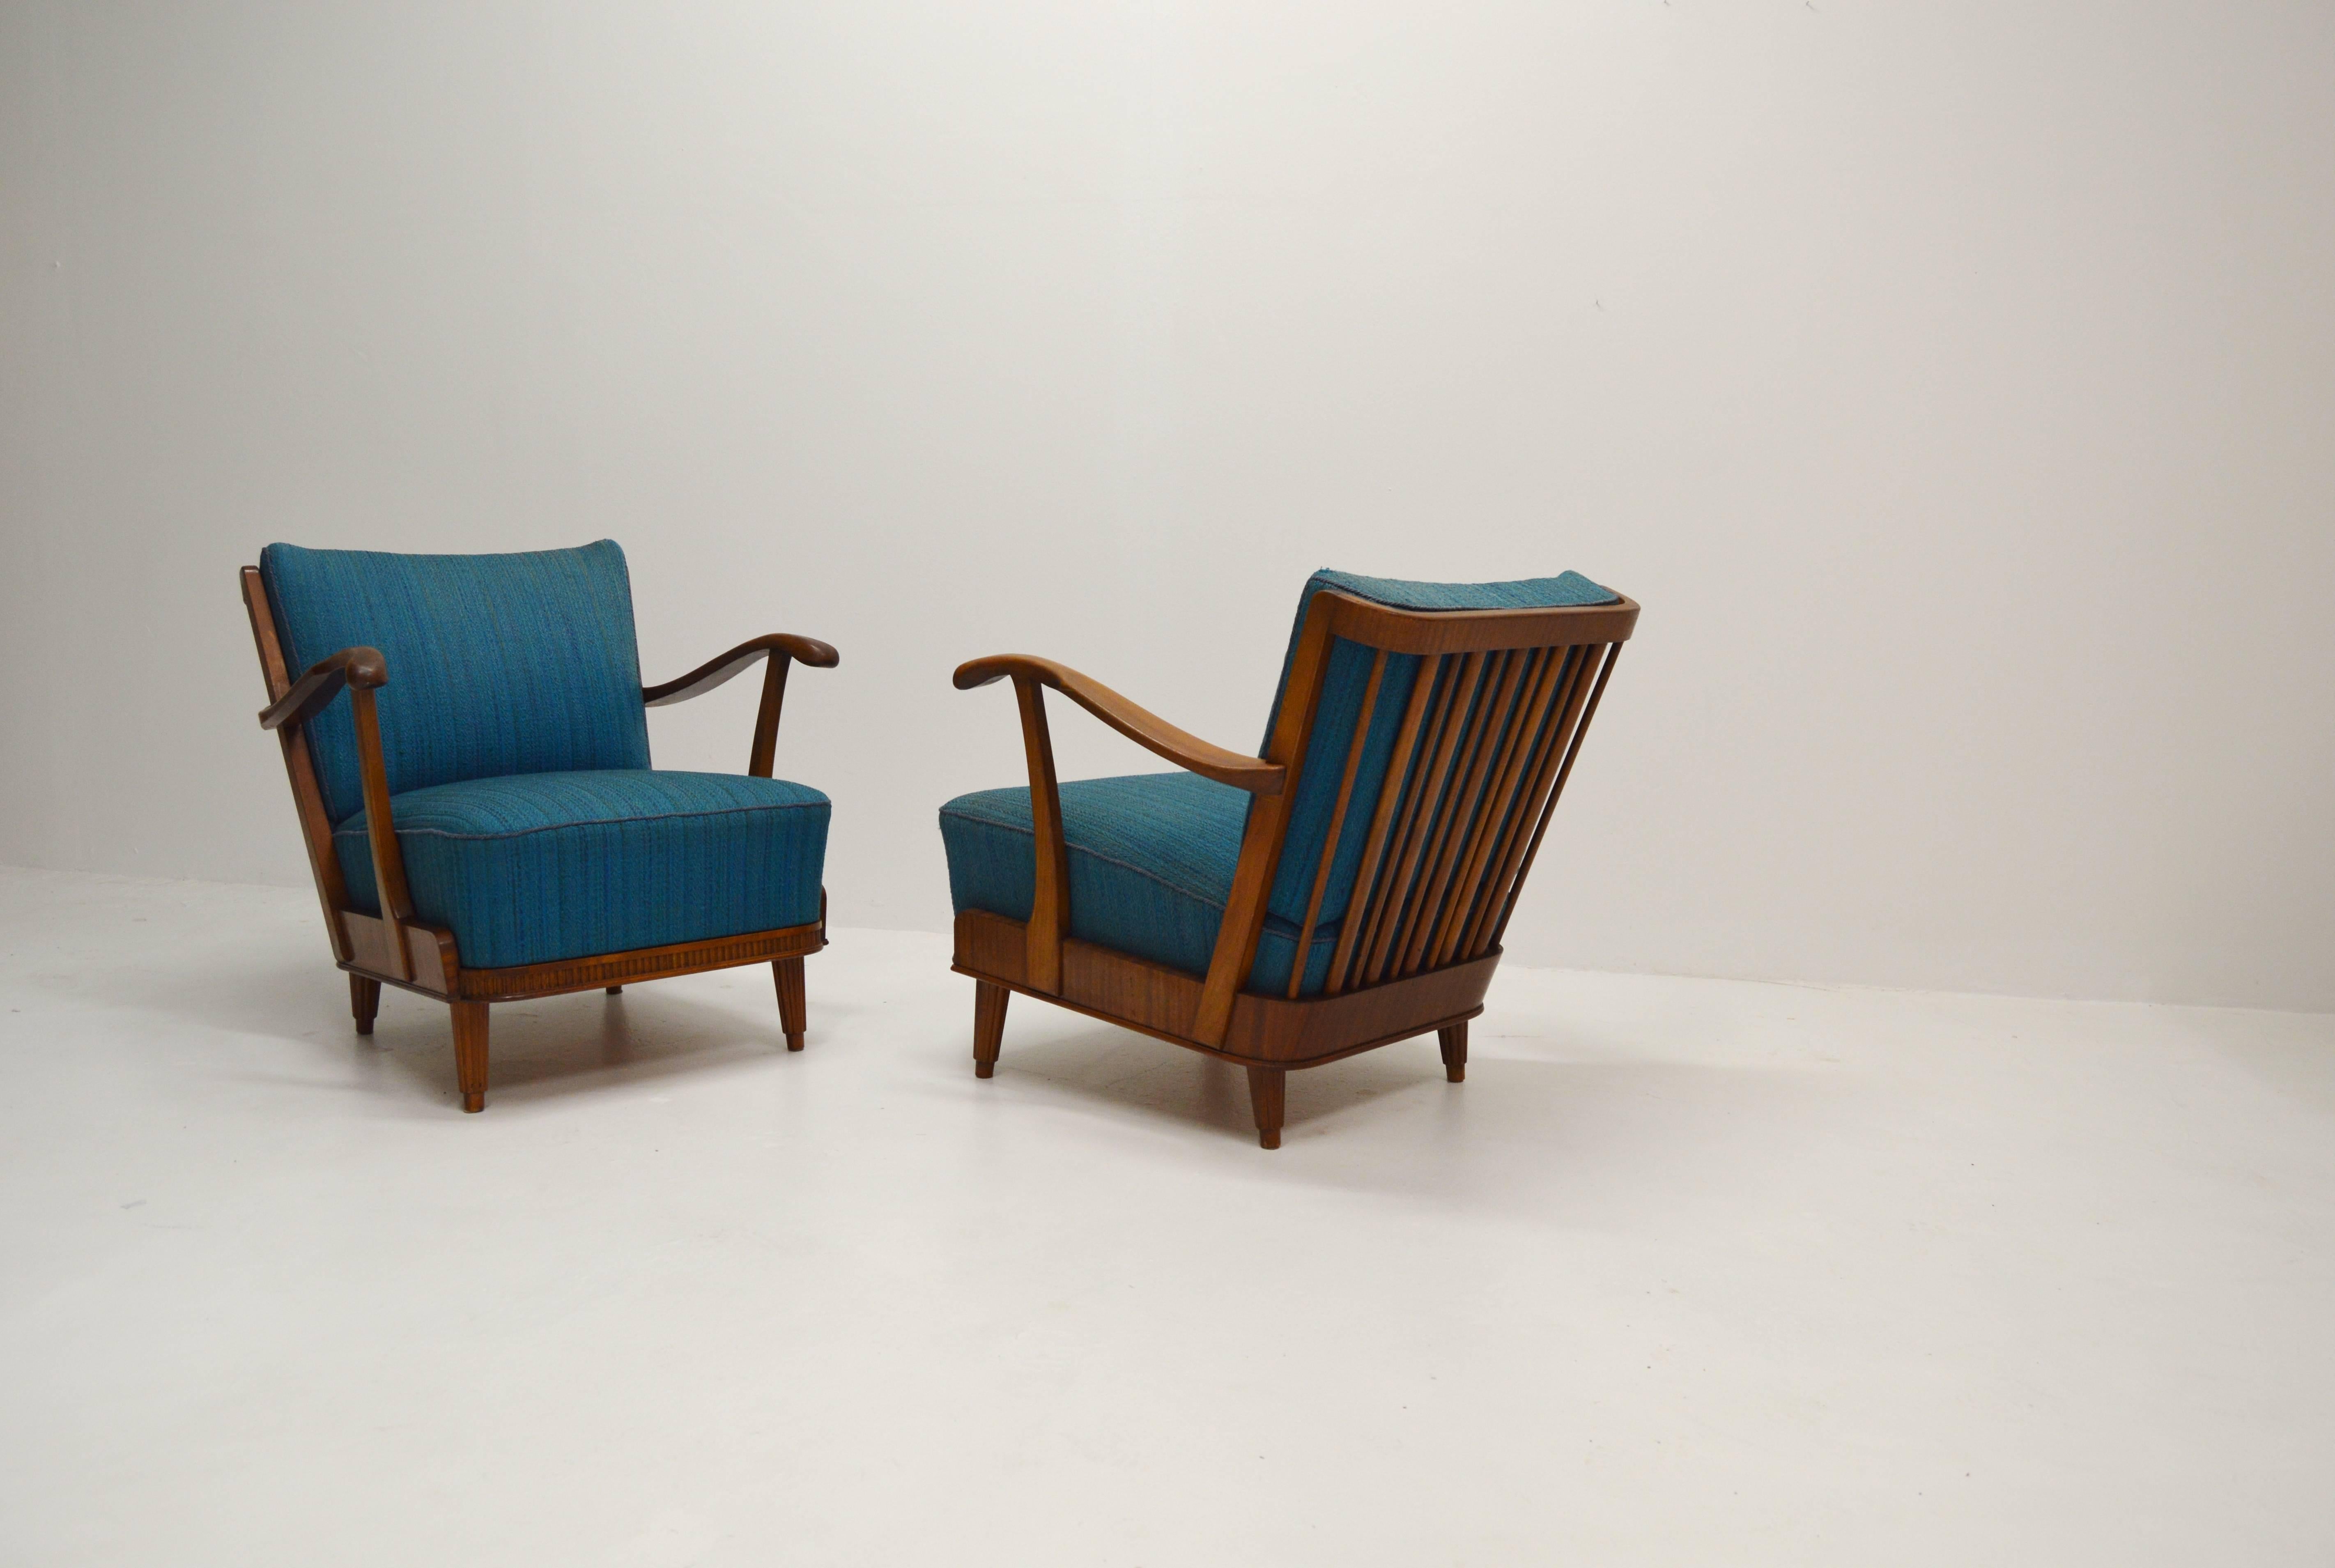 Pair of Svante Skogh Mahogany Lounge Chairs In Good Condition For Sale In Alvesta, SE